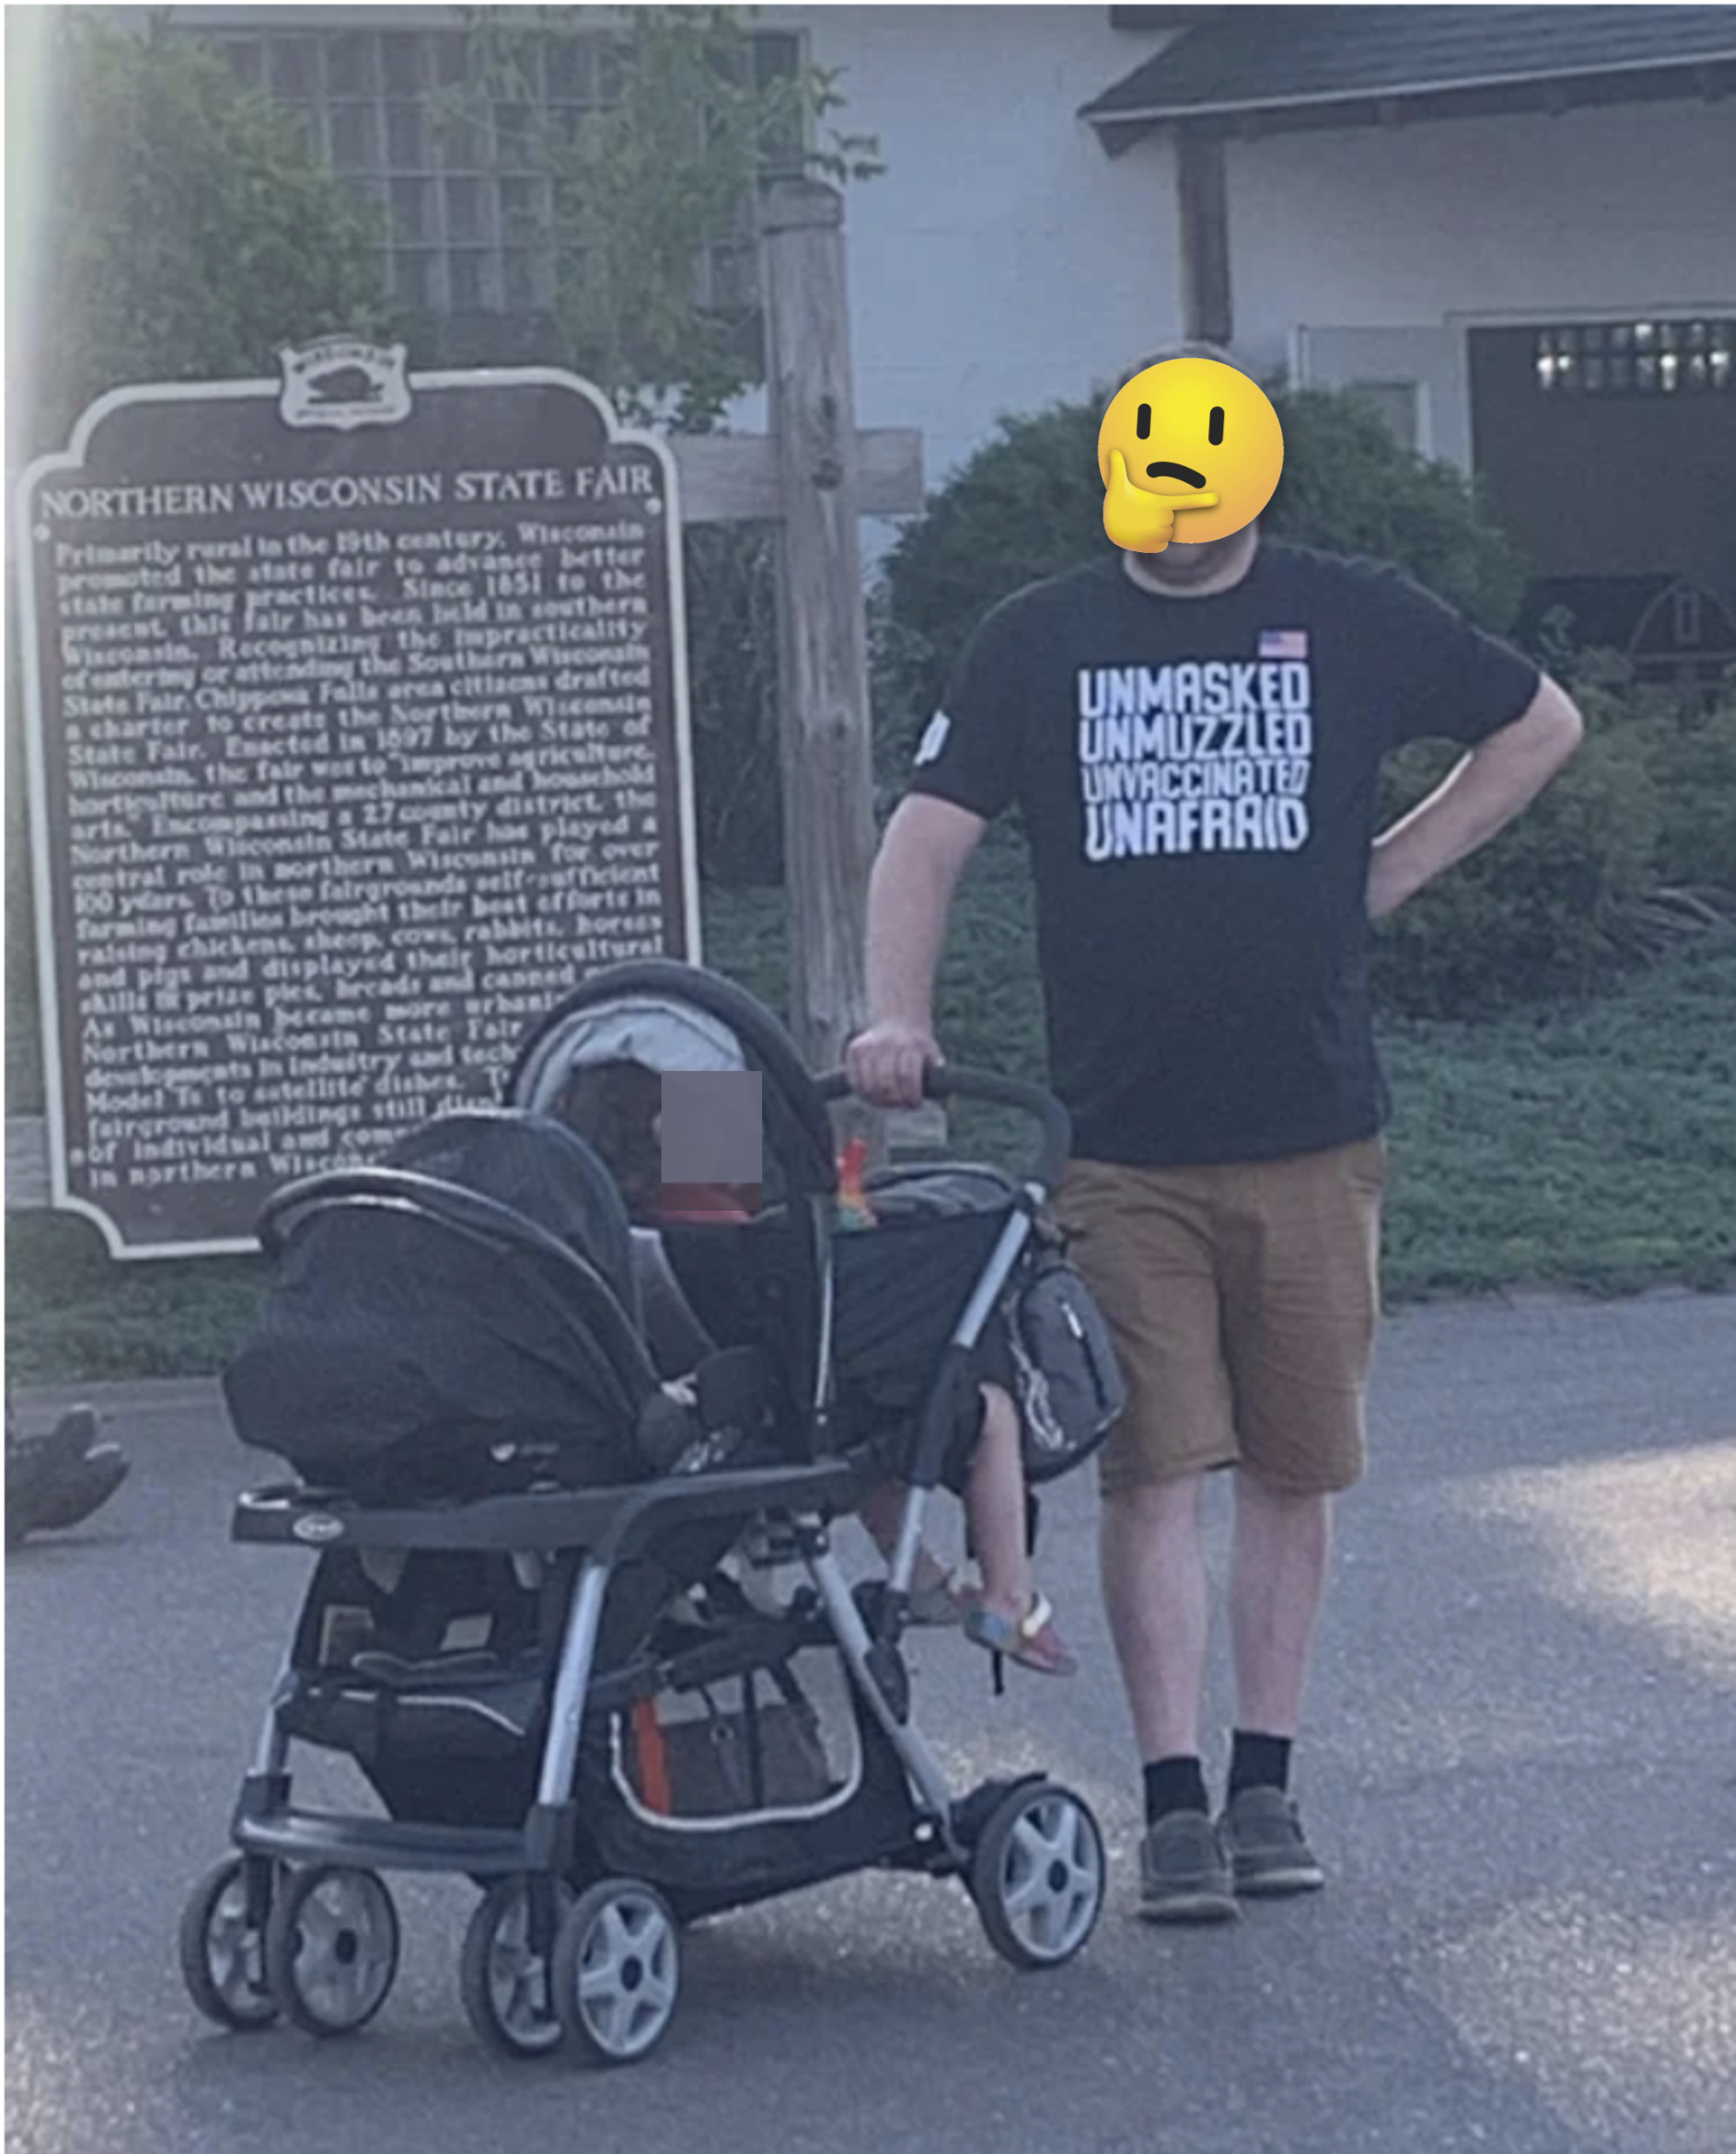 A man pushing a stroller and wearing a shirt that says &quot;unmasked, unmuzzled, unvaccinated, unafraid&quot;